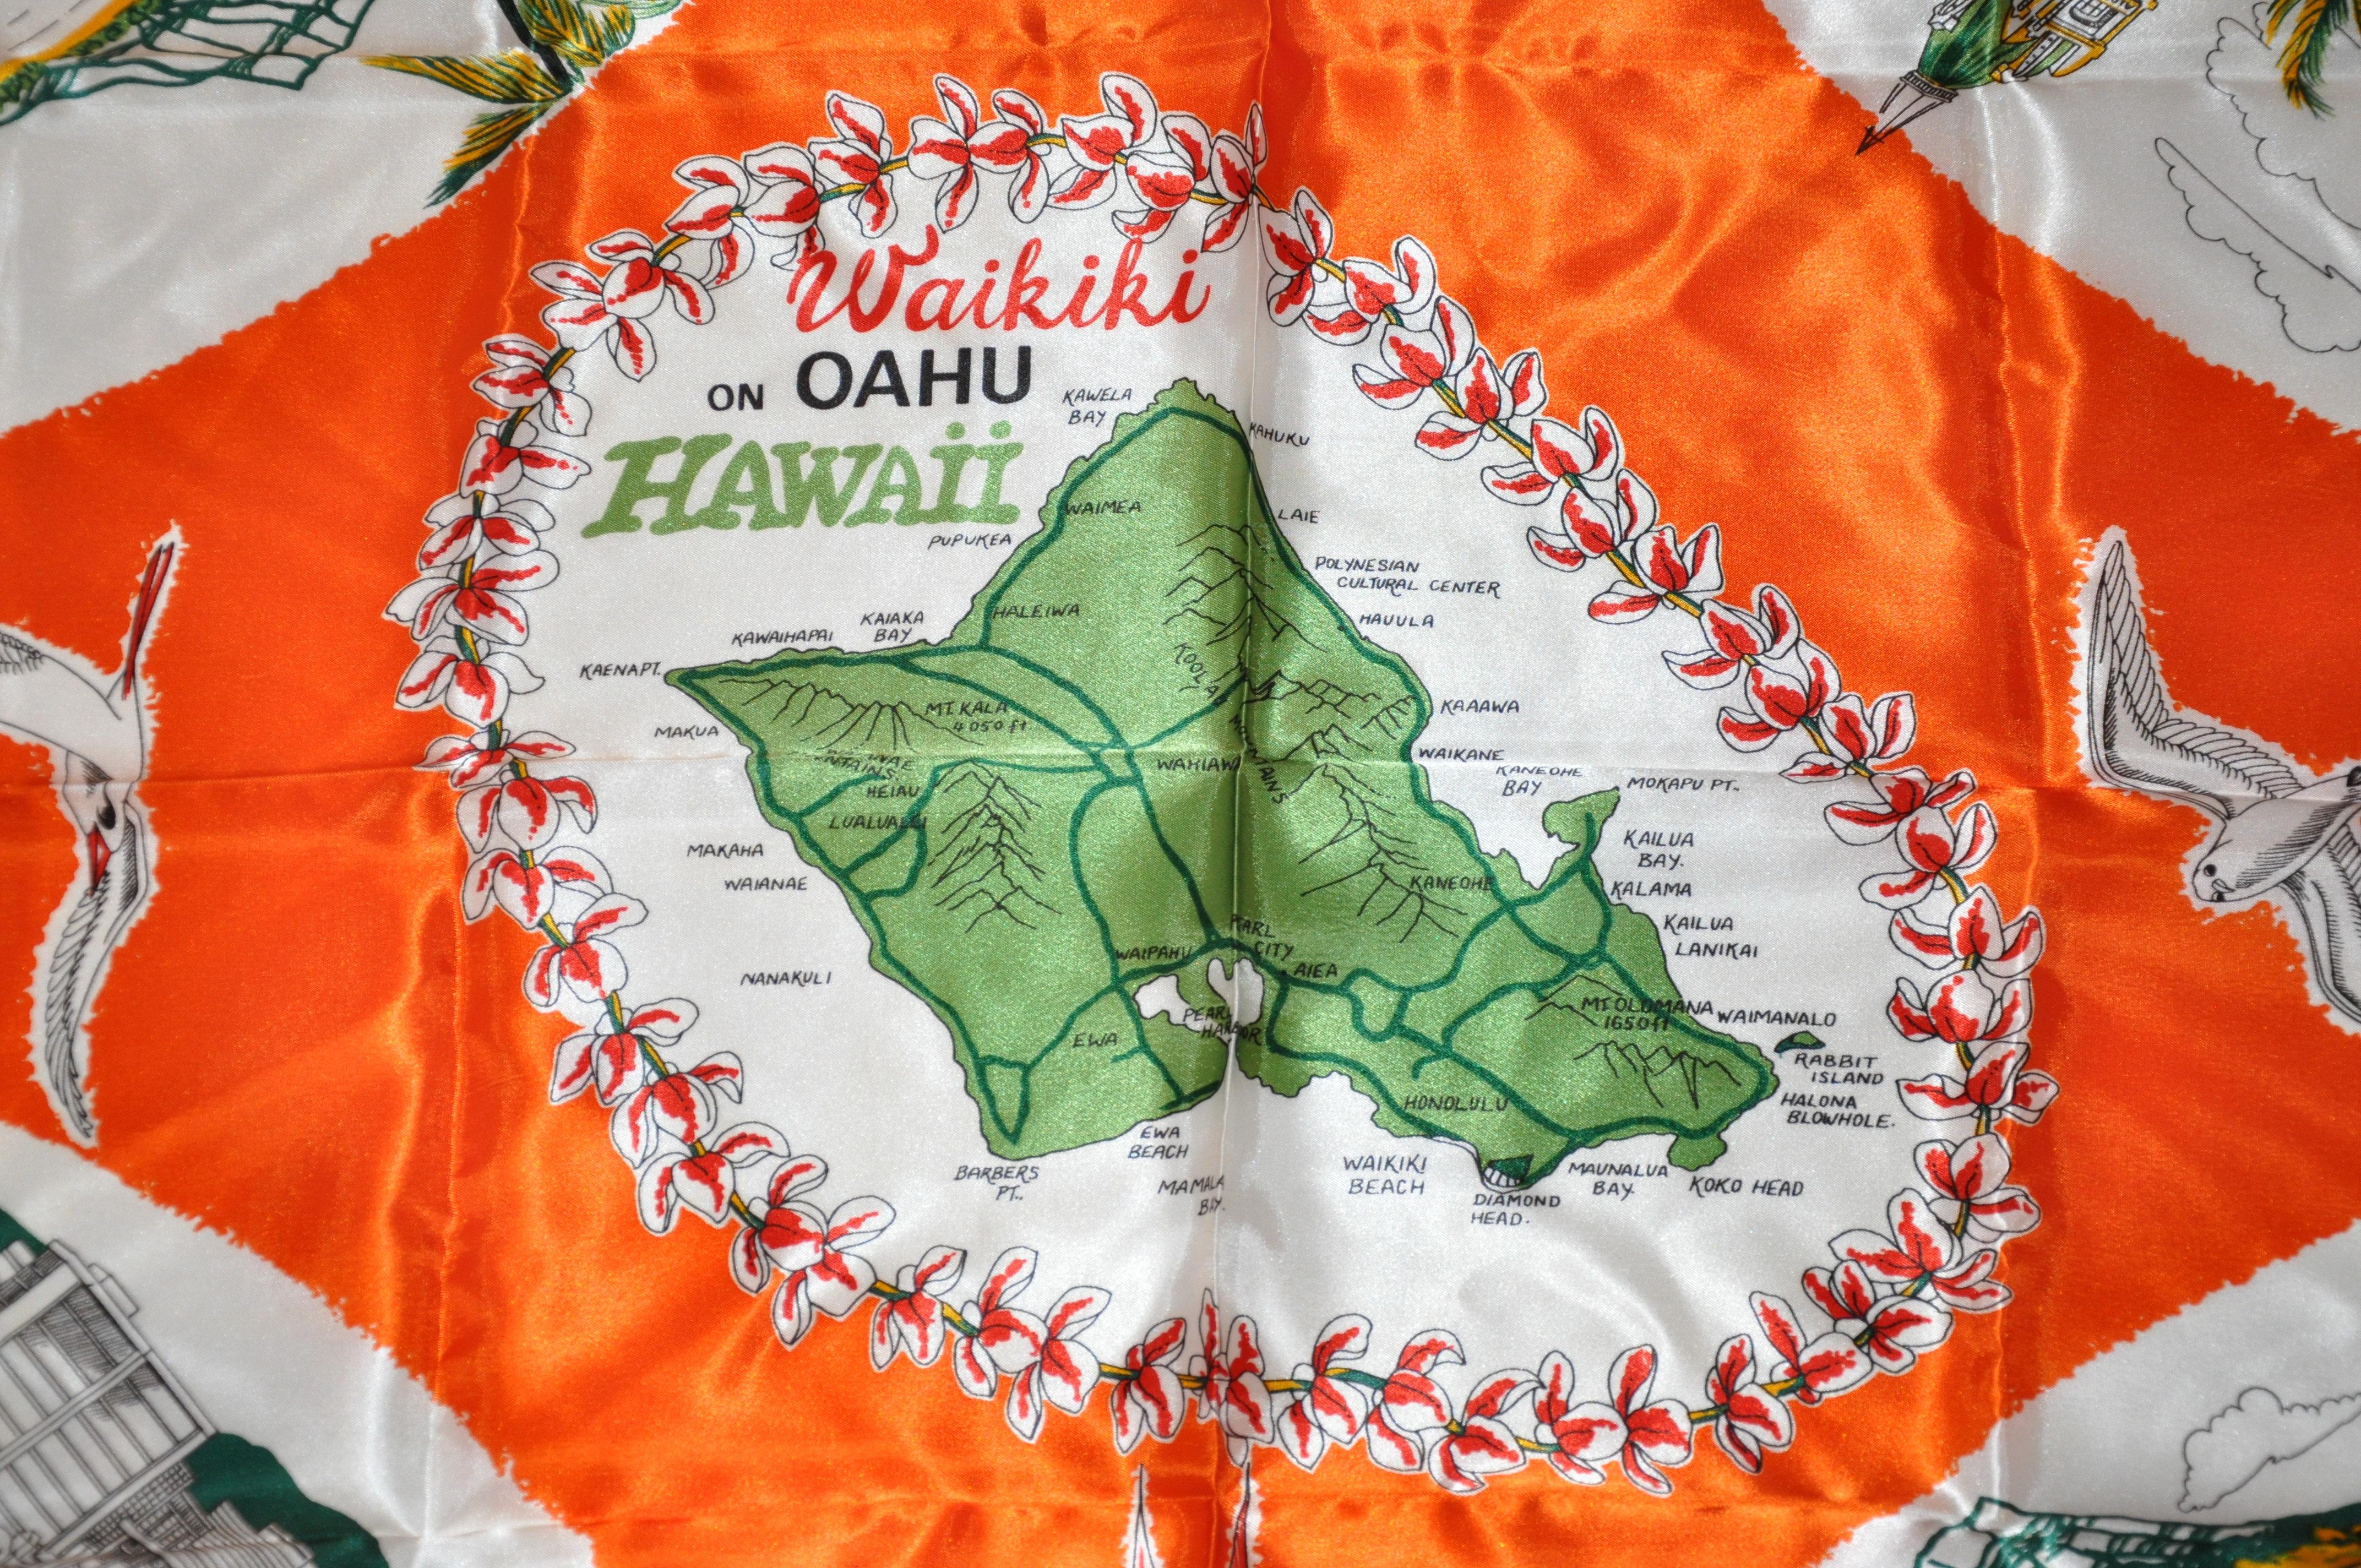        This wonderfully bold and colorful tangerine with scenes of Waikiki On Oahu Hawaii scarf with rolled edges, measures 26 inches by 27 inches. Made of acetate satin and made in  Japan.